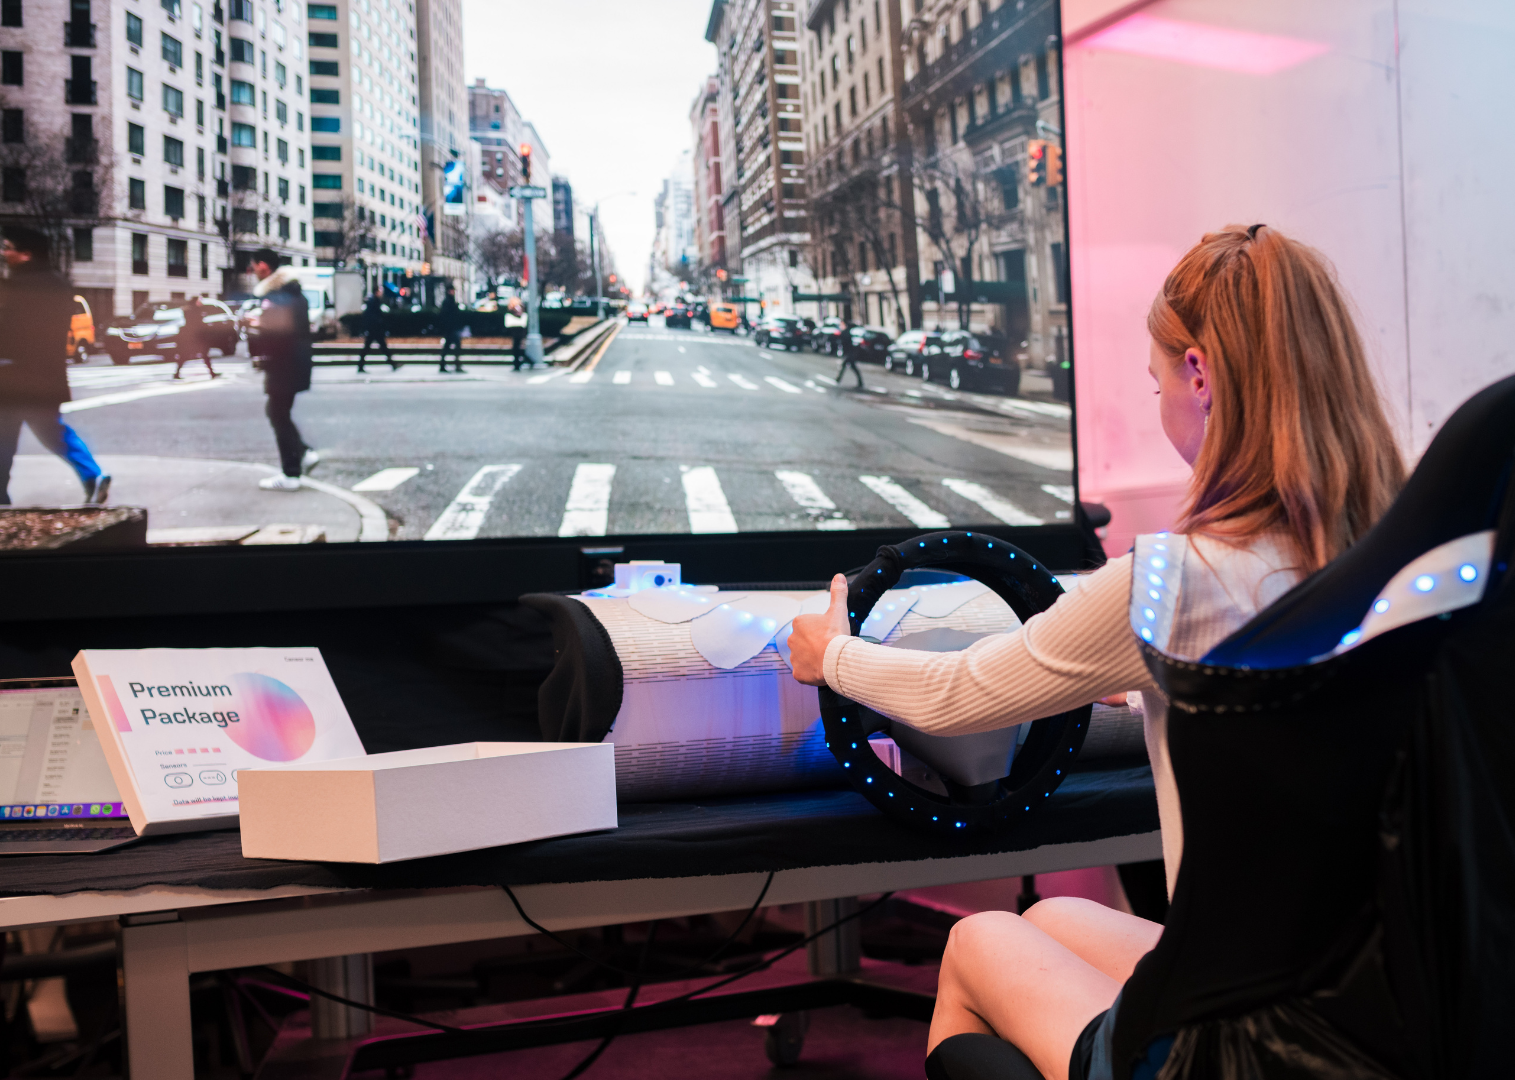 [Translate to English:] Woman testing the driving simulator in front of a big screen with a real life street view displayed on it.